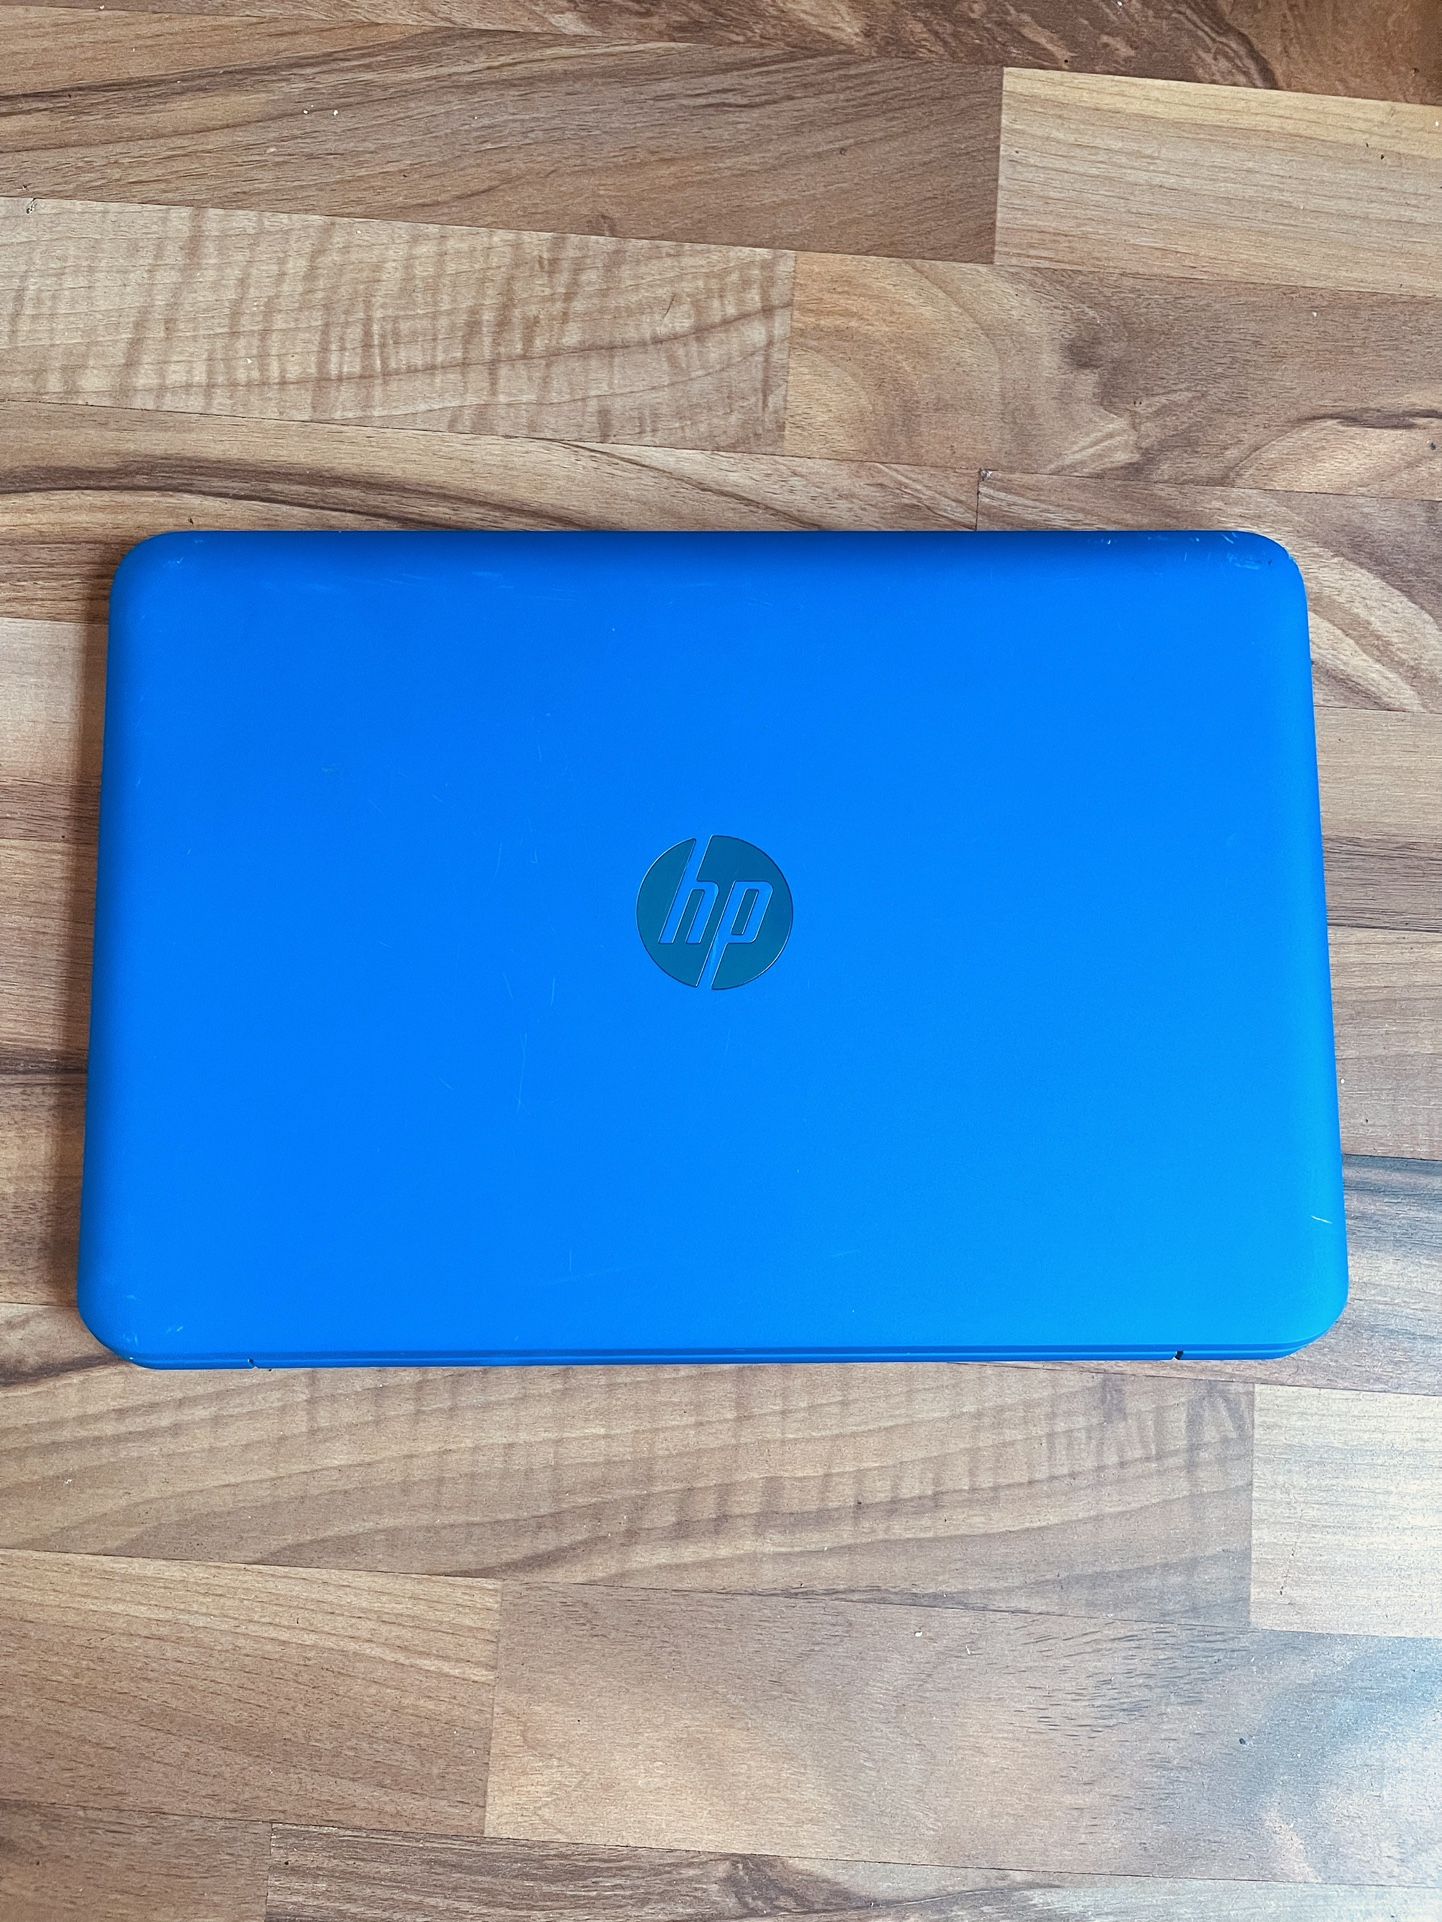 HP Stream 13.3 Windows 10 Laptop  - No Charger